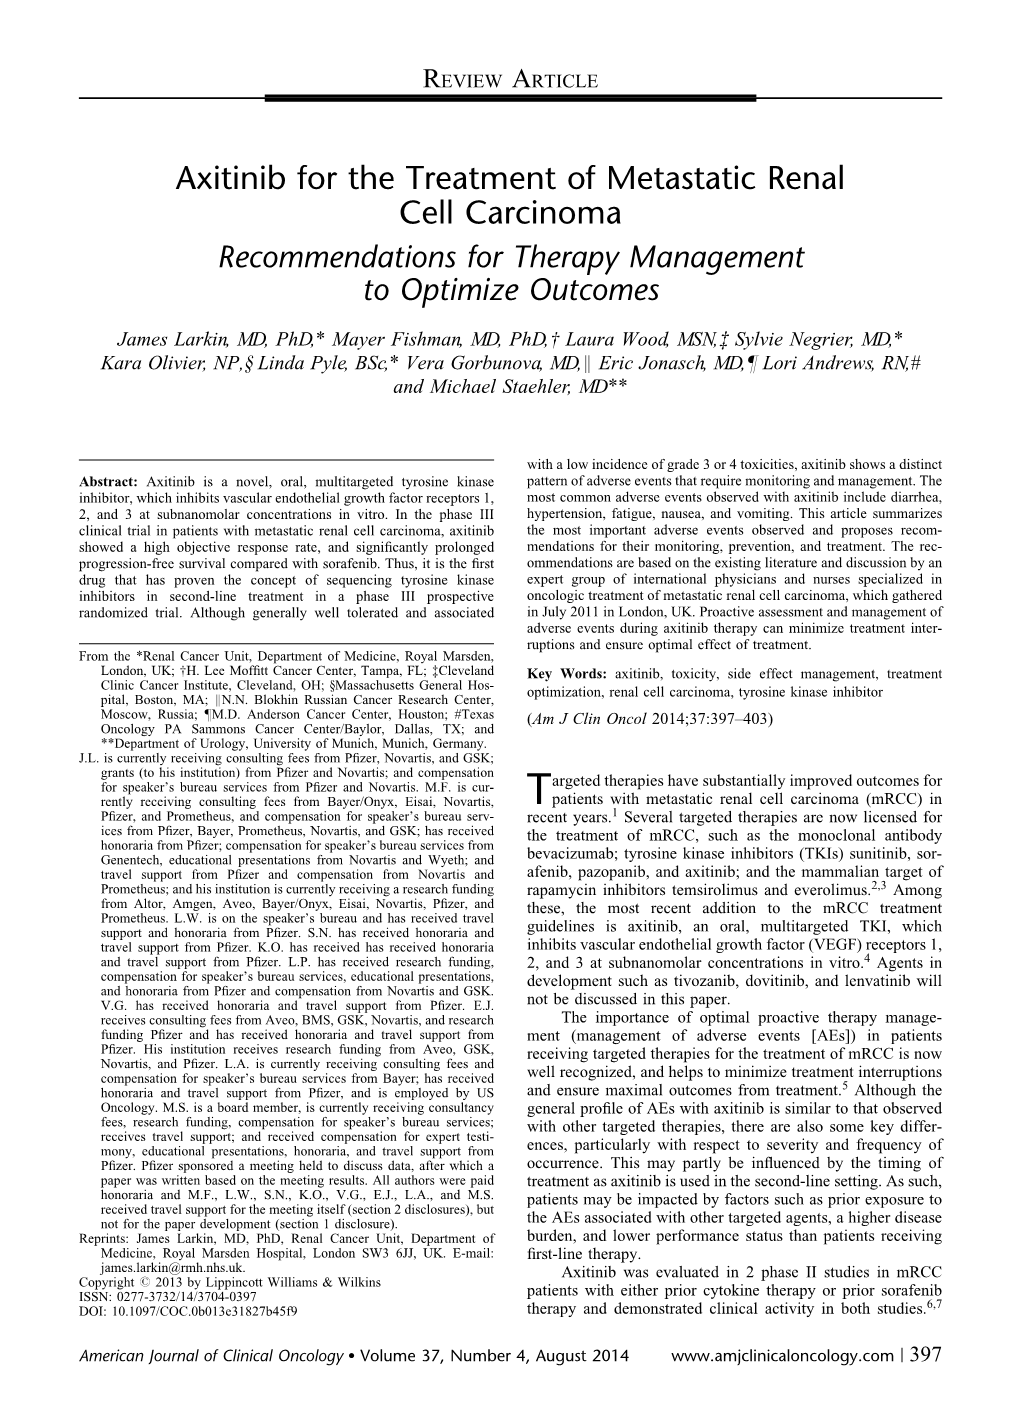 Axitinib for the Treatment of Metastatic Renal Cell Carcinoma Recommendations for Therapy Management to Optimize Outcomes